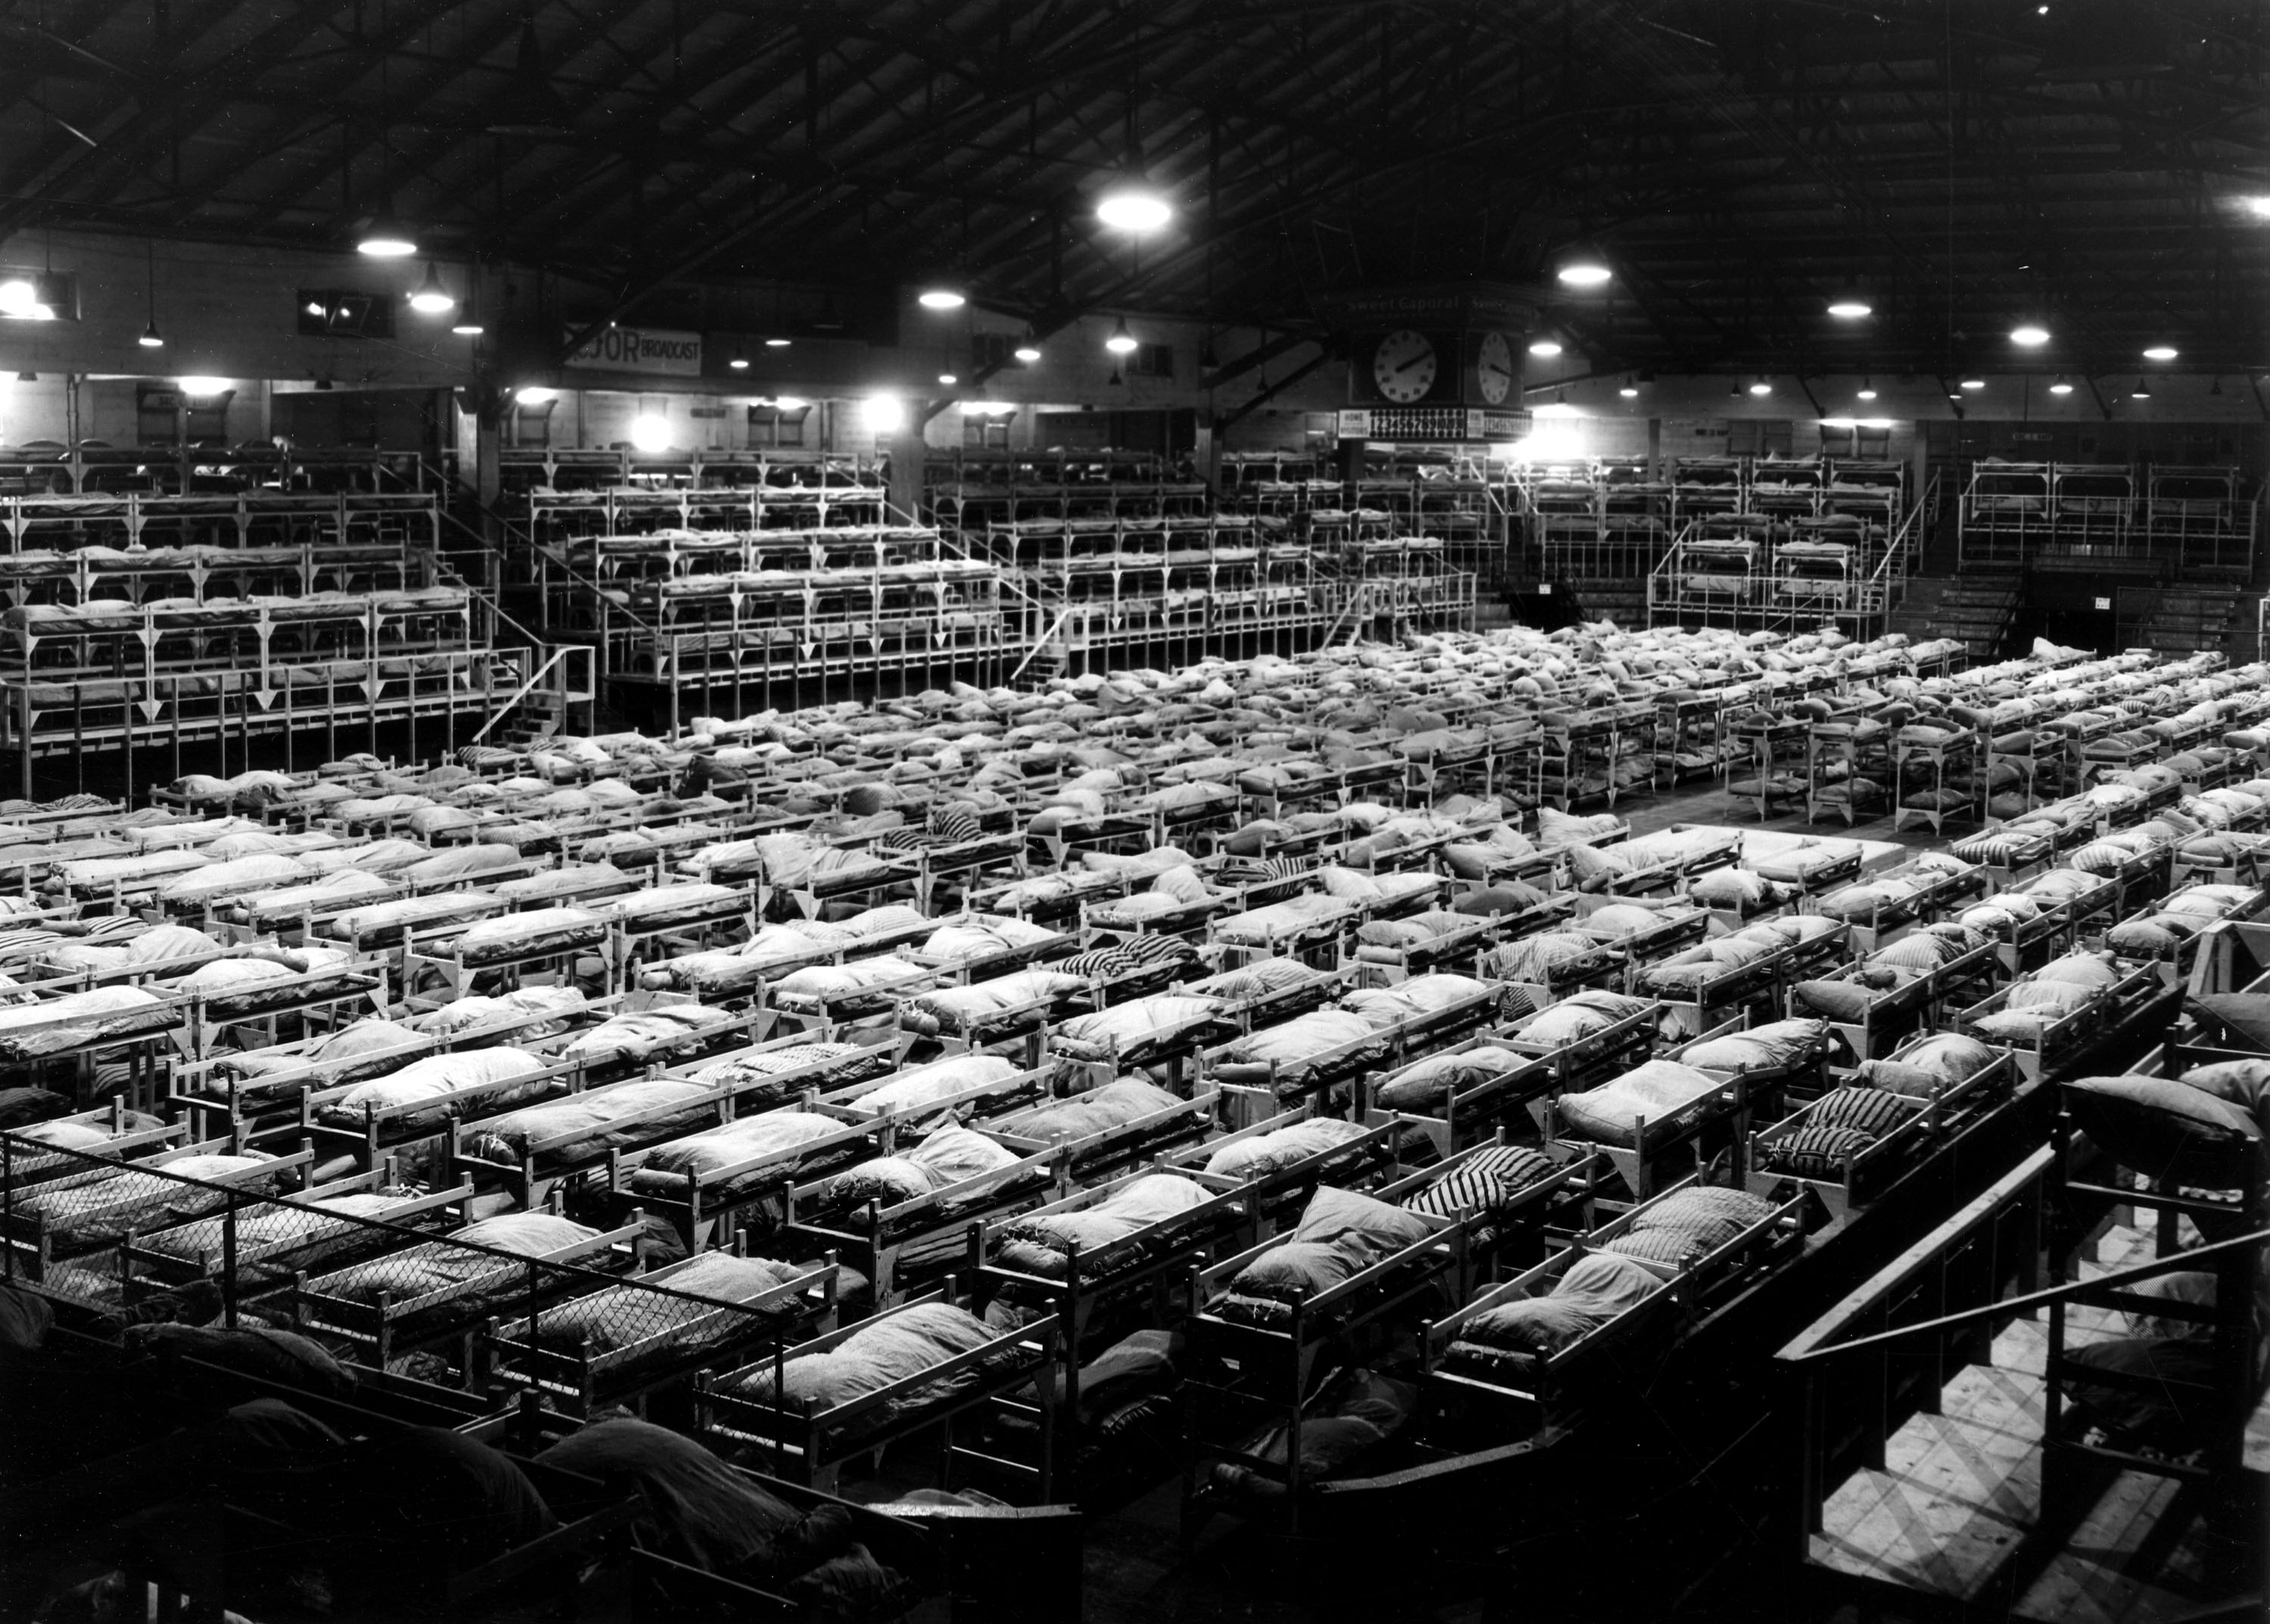 Forum filled with cots